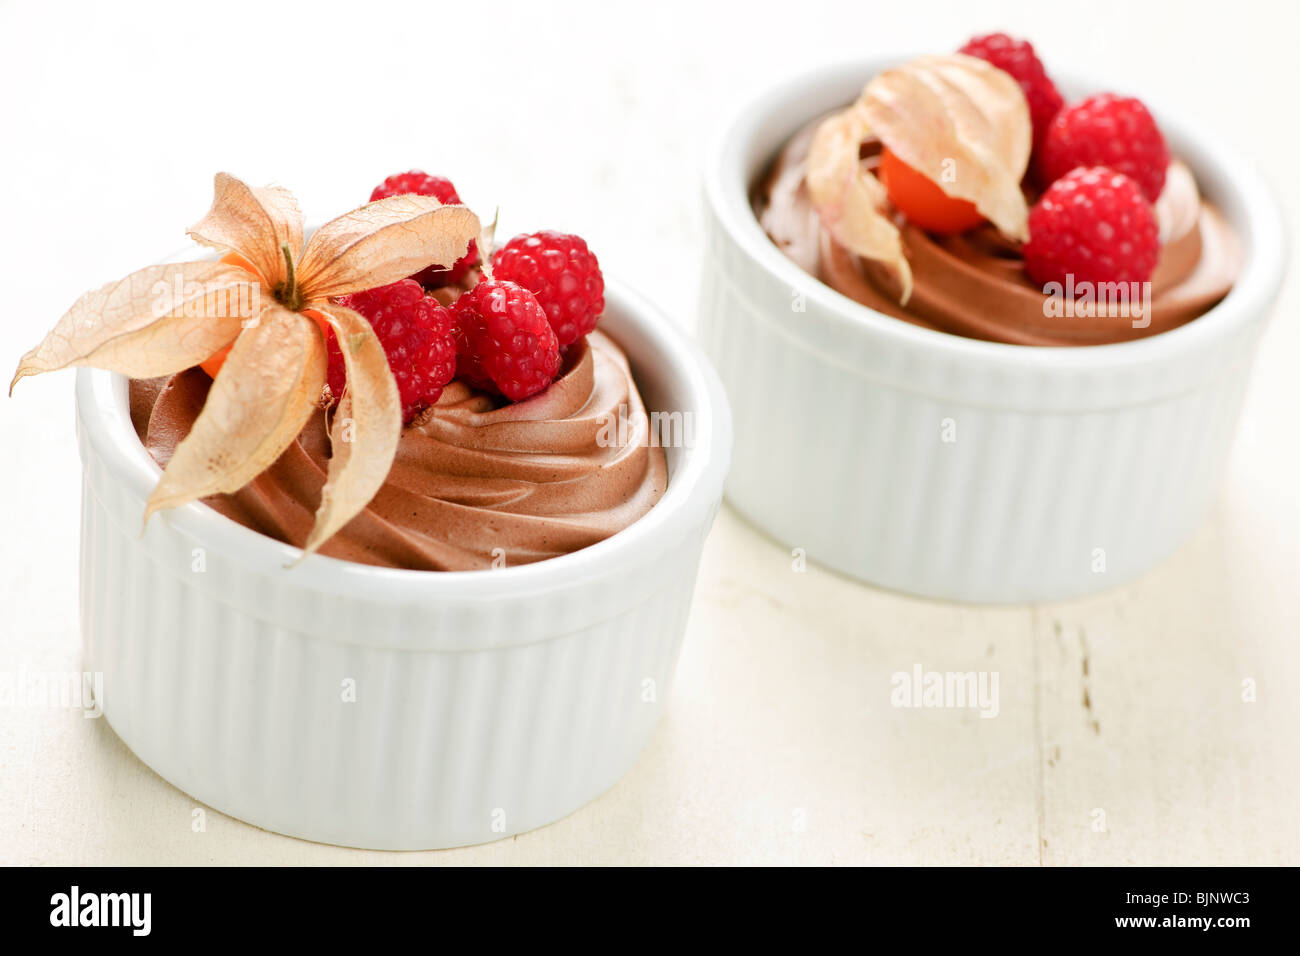 Two servings of chocolate mousse dessert with fruit Stock Photo